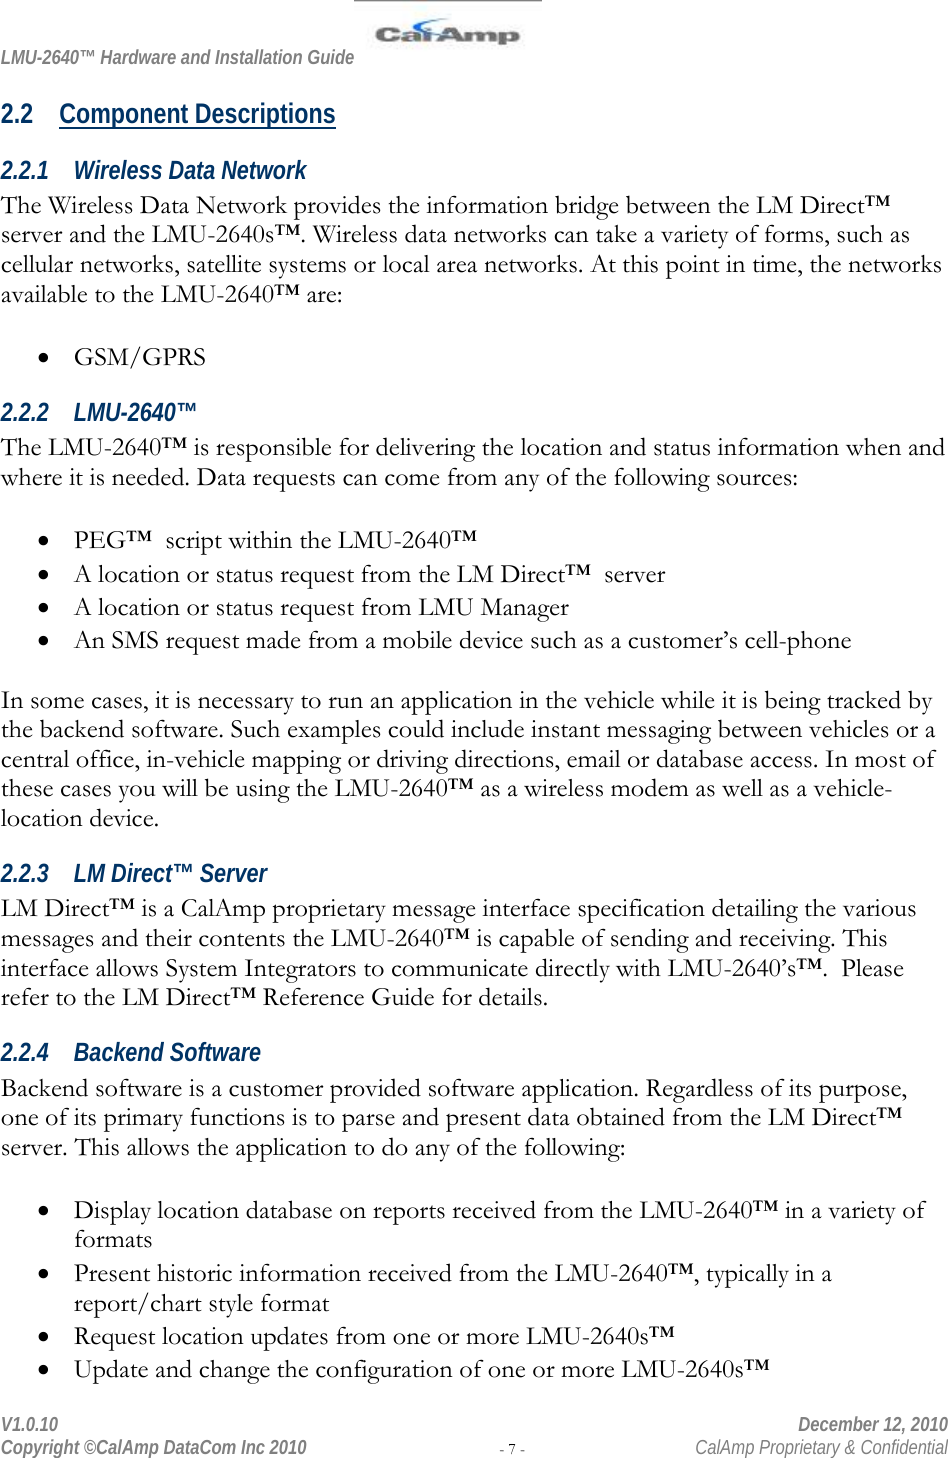 LMU-2640™ Hardware and Installation Guide  V1.0.10    December 12, 2010 Copyright ©CalAmp DataCom Inc 2010 - 7 -  CalAmp Proprietary &amp; Confidential 2.2 Component Descriptions 2.2.1 Wireless Data Network The Wireless Data Network provides the information bridge between the LM Direct™ server and the LMU-2640s™. Wireless data networks can take a variety of forms, such as cellular networks, satellite systems or local area networks. At this point in time, the networks available to the LMU-2640™ are:   GSM/GPRS 2.2.2 LMU-2640™ The LMU-2640™ is responsible for delivering the location and status information when and where it is needed. Data requests can come from any of the following sources:   PEG™  script within the LMU-2640™  A location or status request from the LM Direct™  server  A location or status request from LMU Manager  An SMS request made from a mobile device such as a customer’s cell-phone  In some cases, it is necessary to run an application in the vehicle while it is being tracked by the backend software. Such examples could include instant messaging between vehicles or a central office, in-vehicle mapping or driving directions, email or database access. In most of these cases you will be using the LMU-2640™ as a wireless modem as well as a vehicle-location device. 2.2.3 LM Direct™ Server LM Direct™ is a CalAmp proprietary message interface specification detailing the various messages and their contents the LMU-2640™ is capable of sending and receiving. This interface allows System Integrators to communicate directly with LMU-2640’s™.  Please refer to the LM Direct™ Reference Guide for details. 2.2.4 Backend Software Backend software is a customer provided software application. Regardless of its purpose, one of its primary functions is to parse and present data obtained from the LM Direct™ server. This allows the application to do any of the following:   Display location database on reports received from the LMU-2640™ in a variety of formats  Present historic information received from the LMU-2640™, typically in a report/chart style format  Request location updates from one or more LMU-2640s™  Update and change the configuration of one or more LMU-2640s™ 